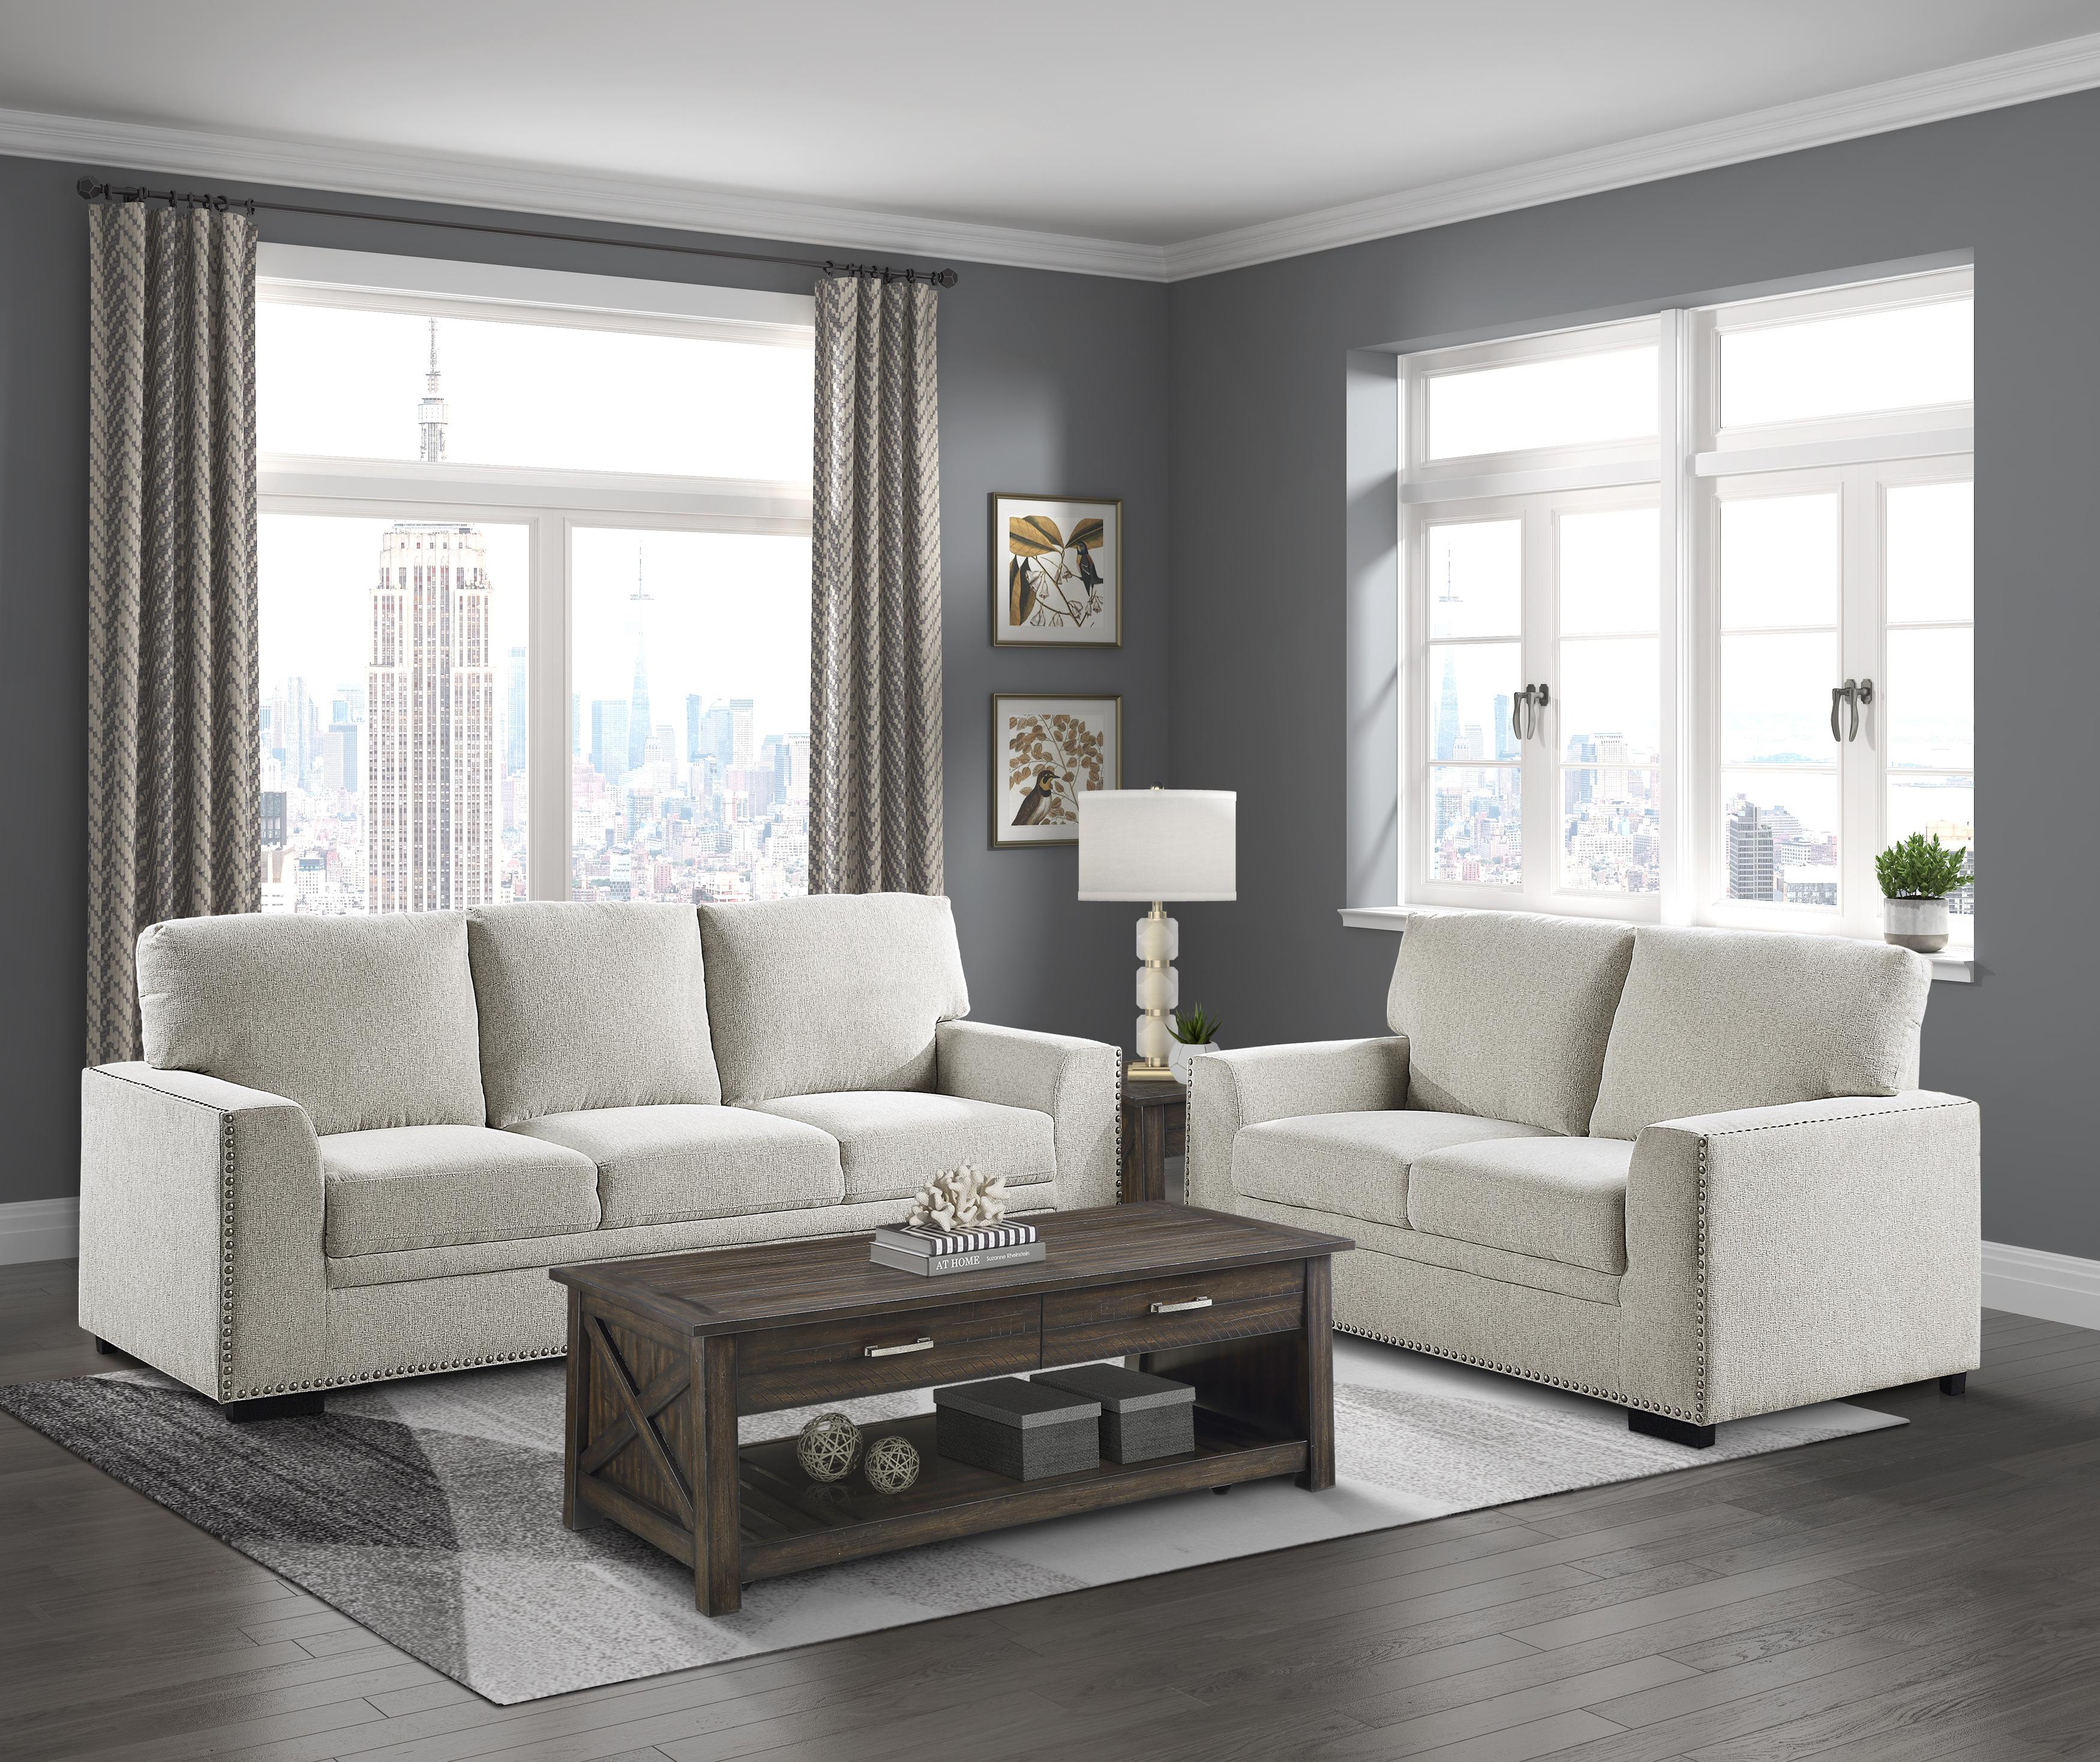 Modern Living Room Set 9468BE-3-2PC Morelia 9468BE-3-2PC in Beige Chenille